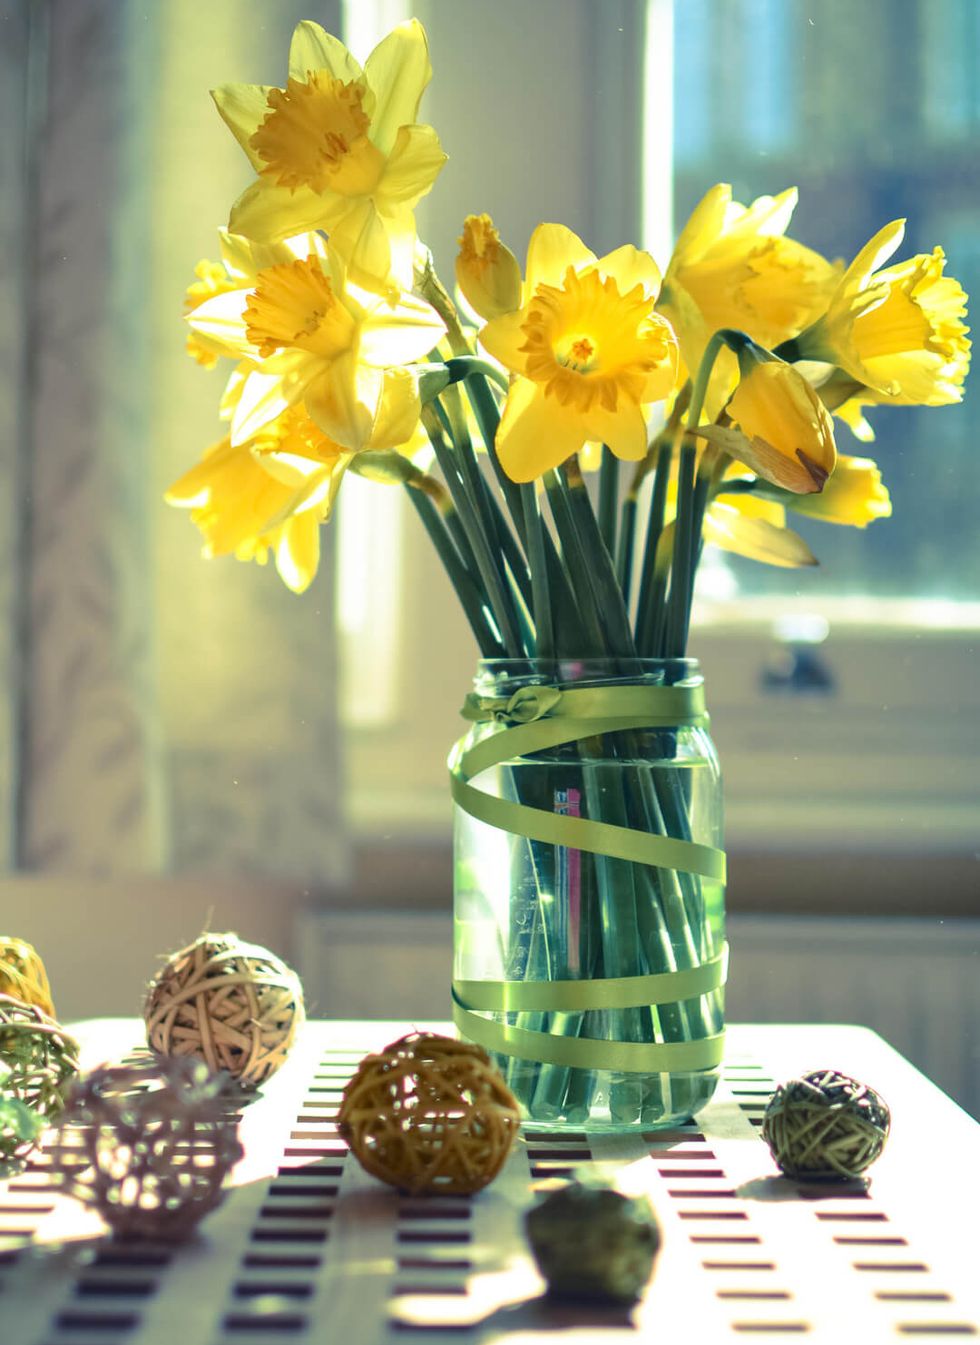 Close-Up Of Yellow Flowers In Vase On Table